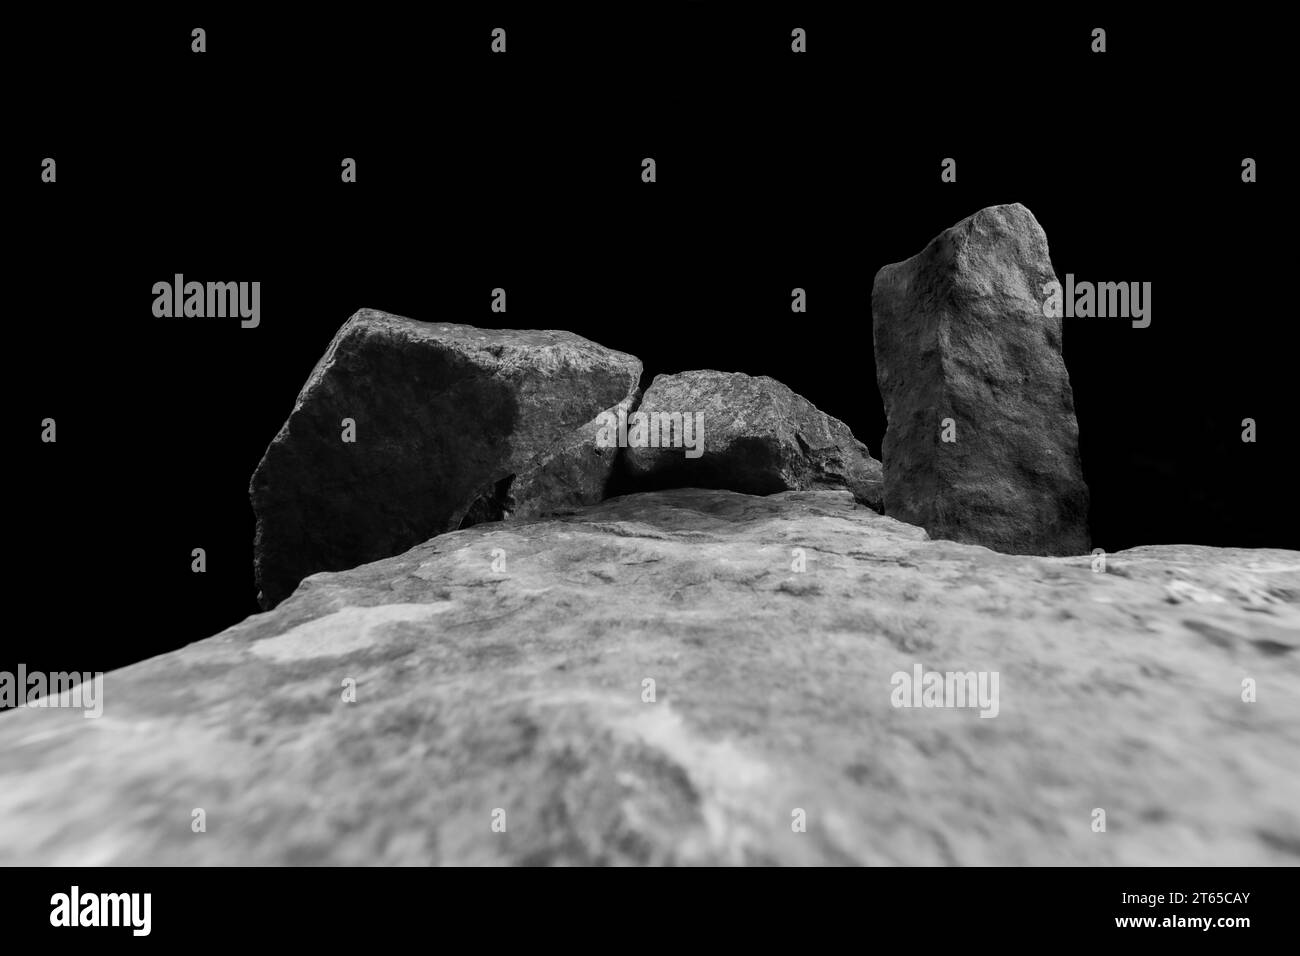 A Wide Angle of a Rock for a Product Display, Showing a Blurred Foreground Leading to a Middle Stone with a Light Shadow on the Natural Texture. Stock Photo